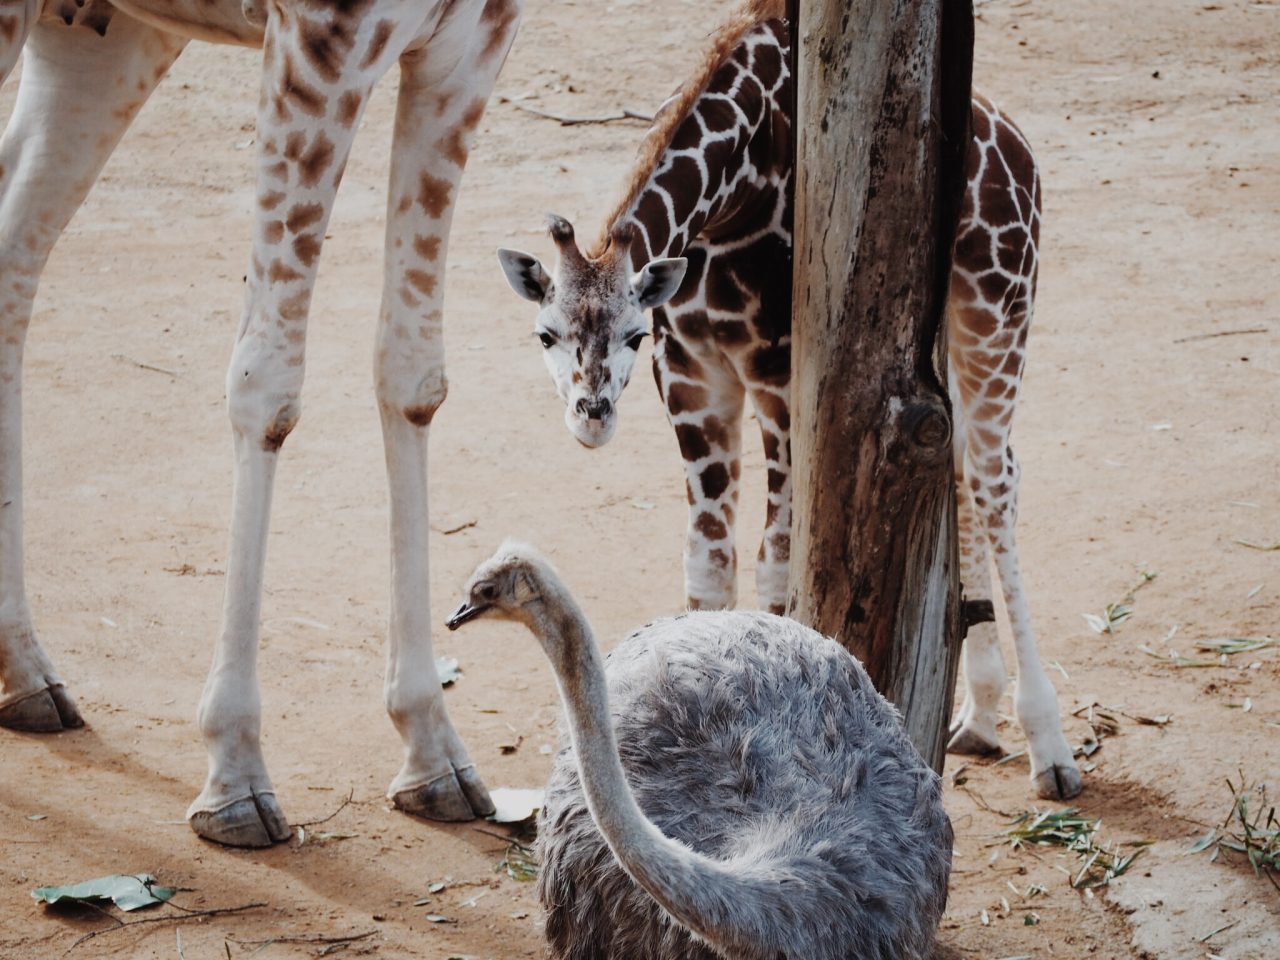 a close up of a baby giraffe who is looking at a baby emu on the dirt